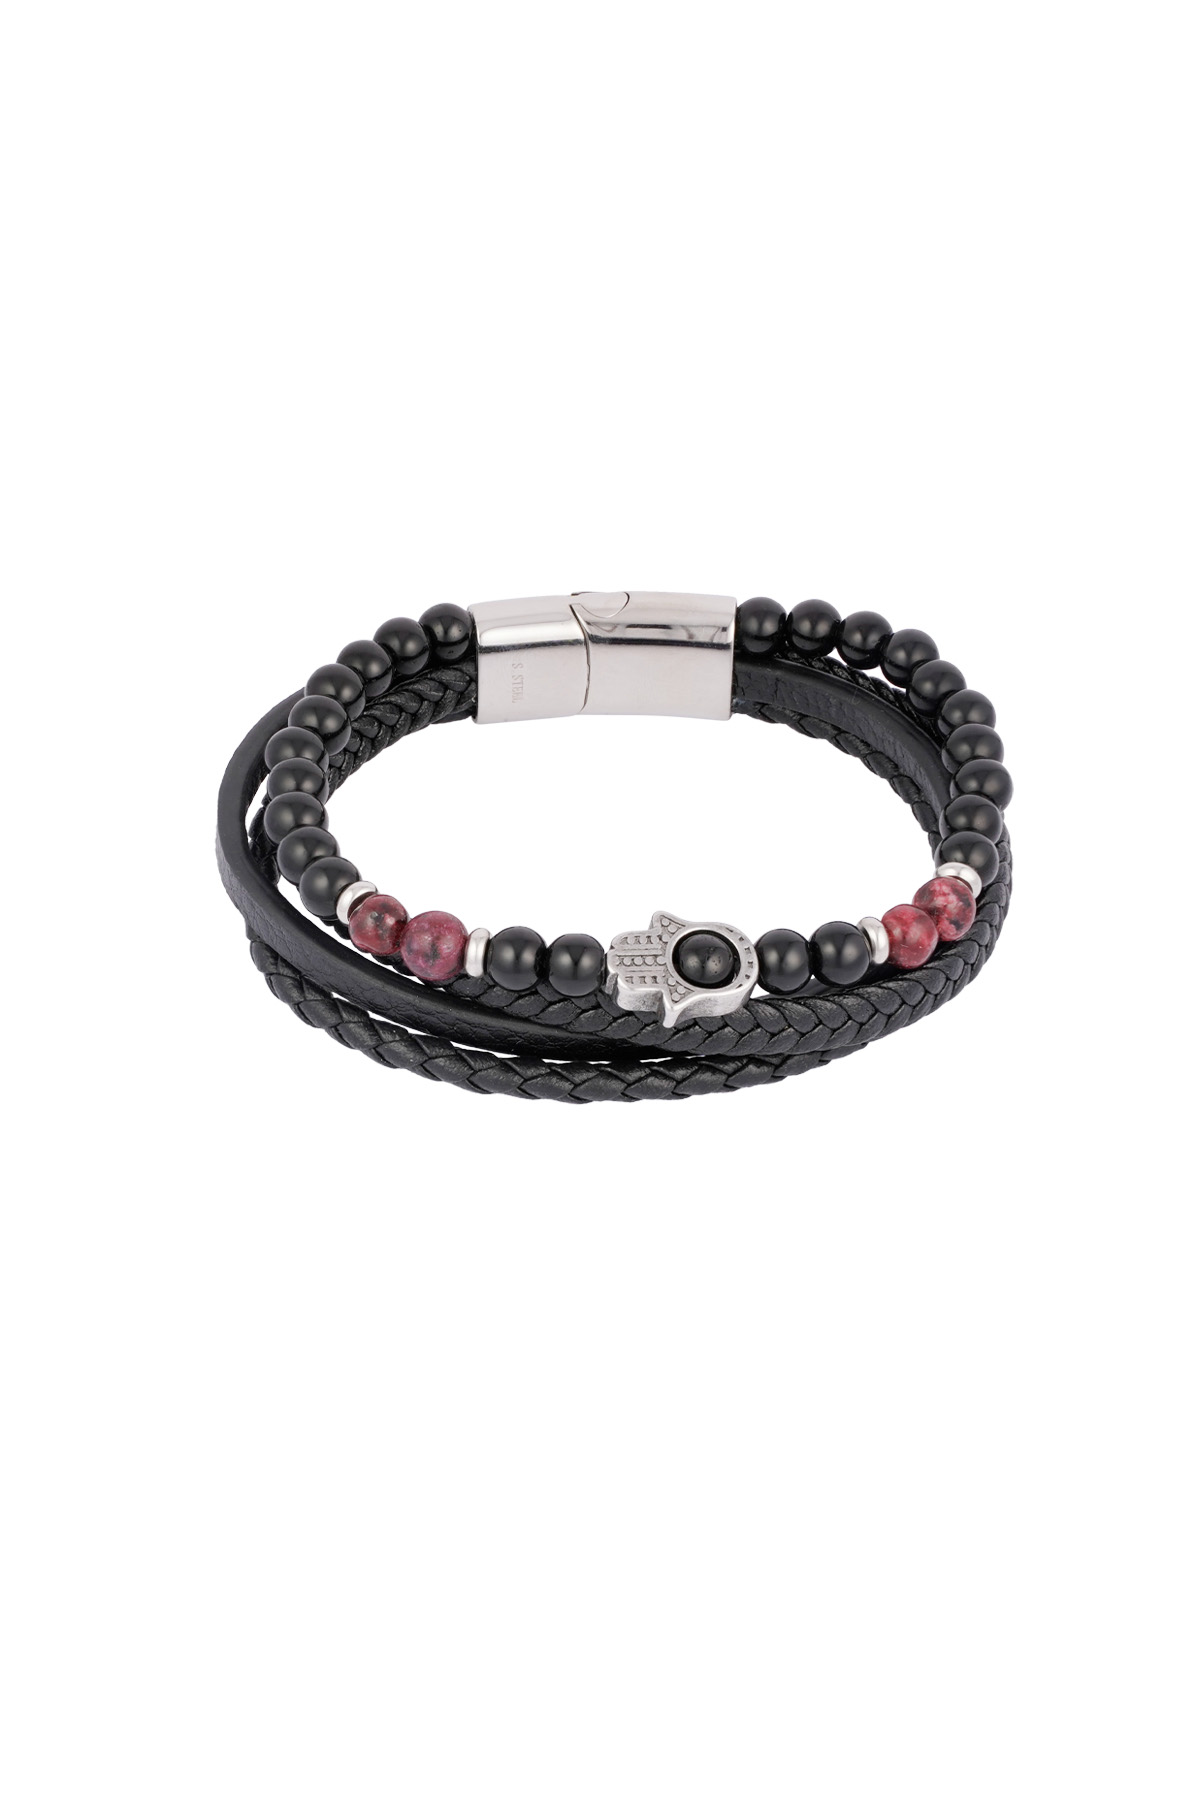 Double men's bracelet with hand charm - Wine Red